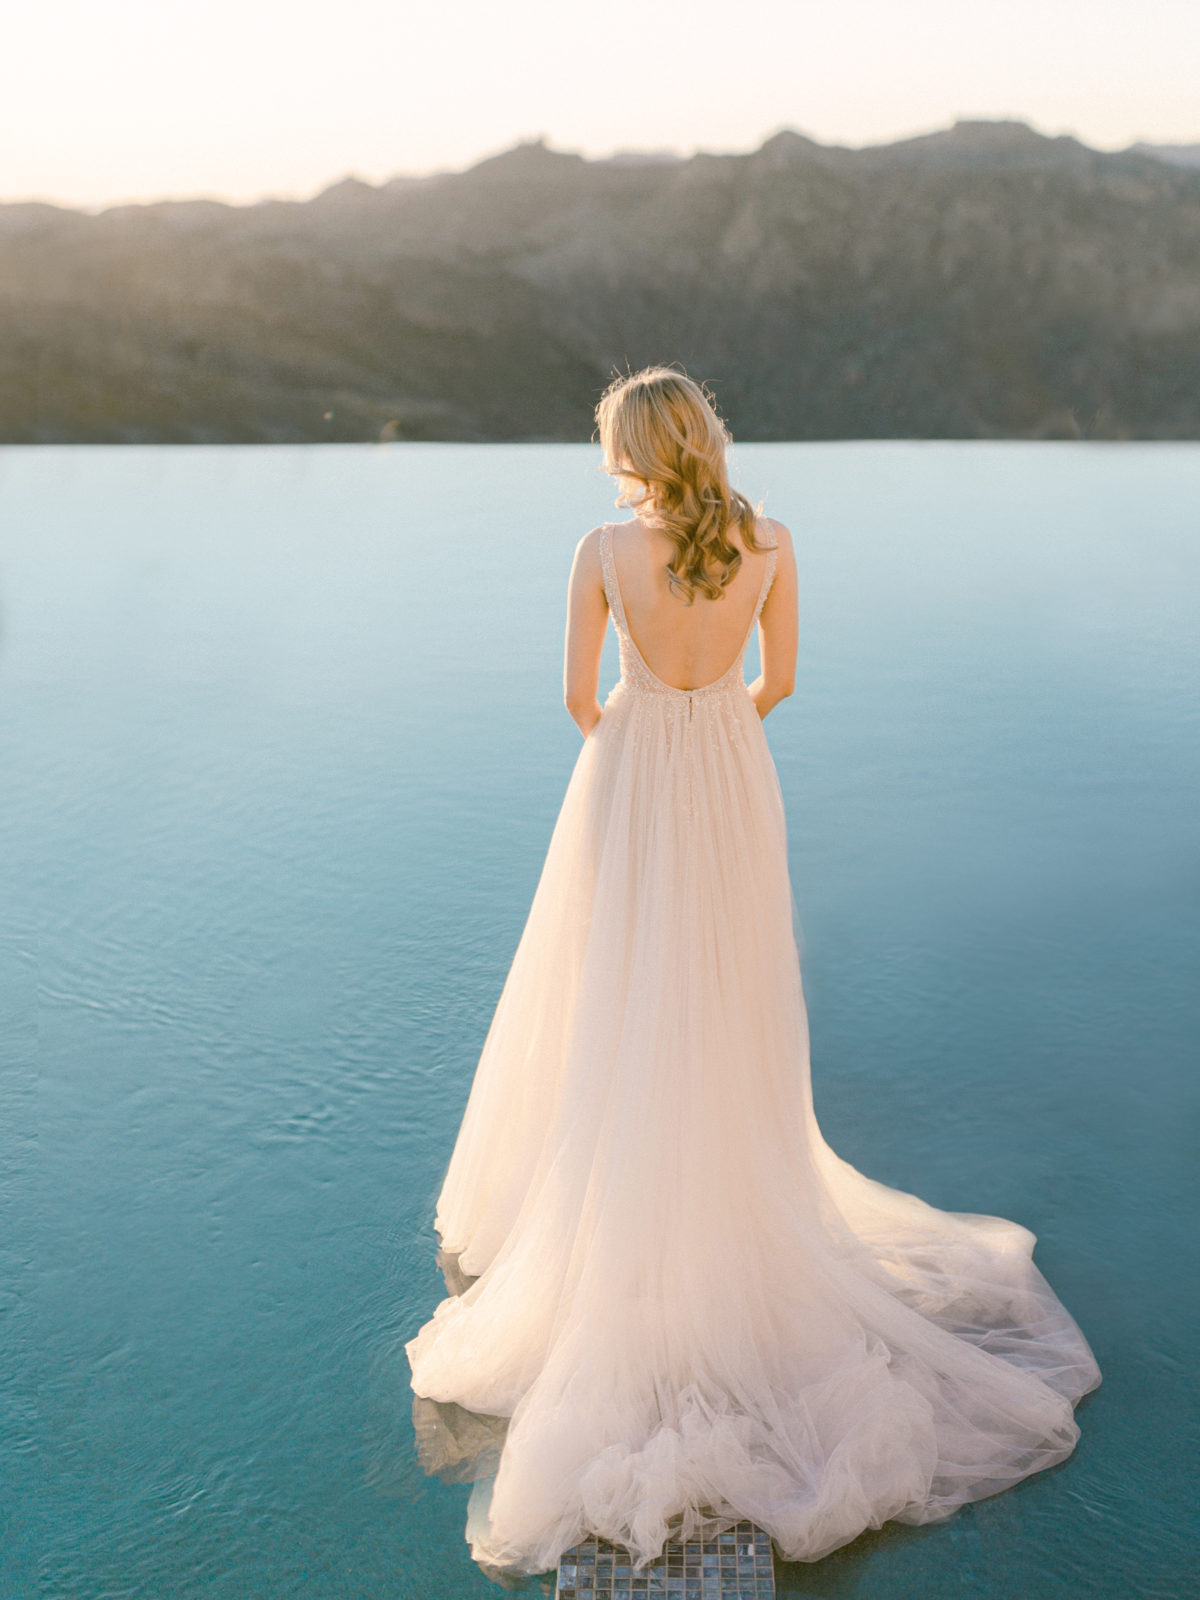 Spectacular view of bride on infinity pool